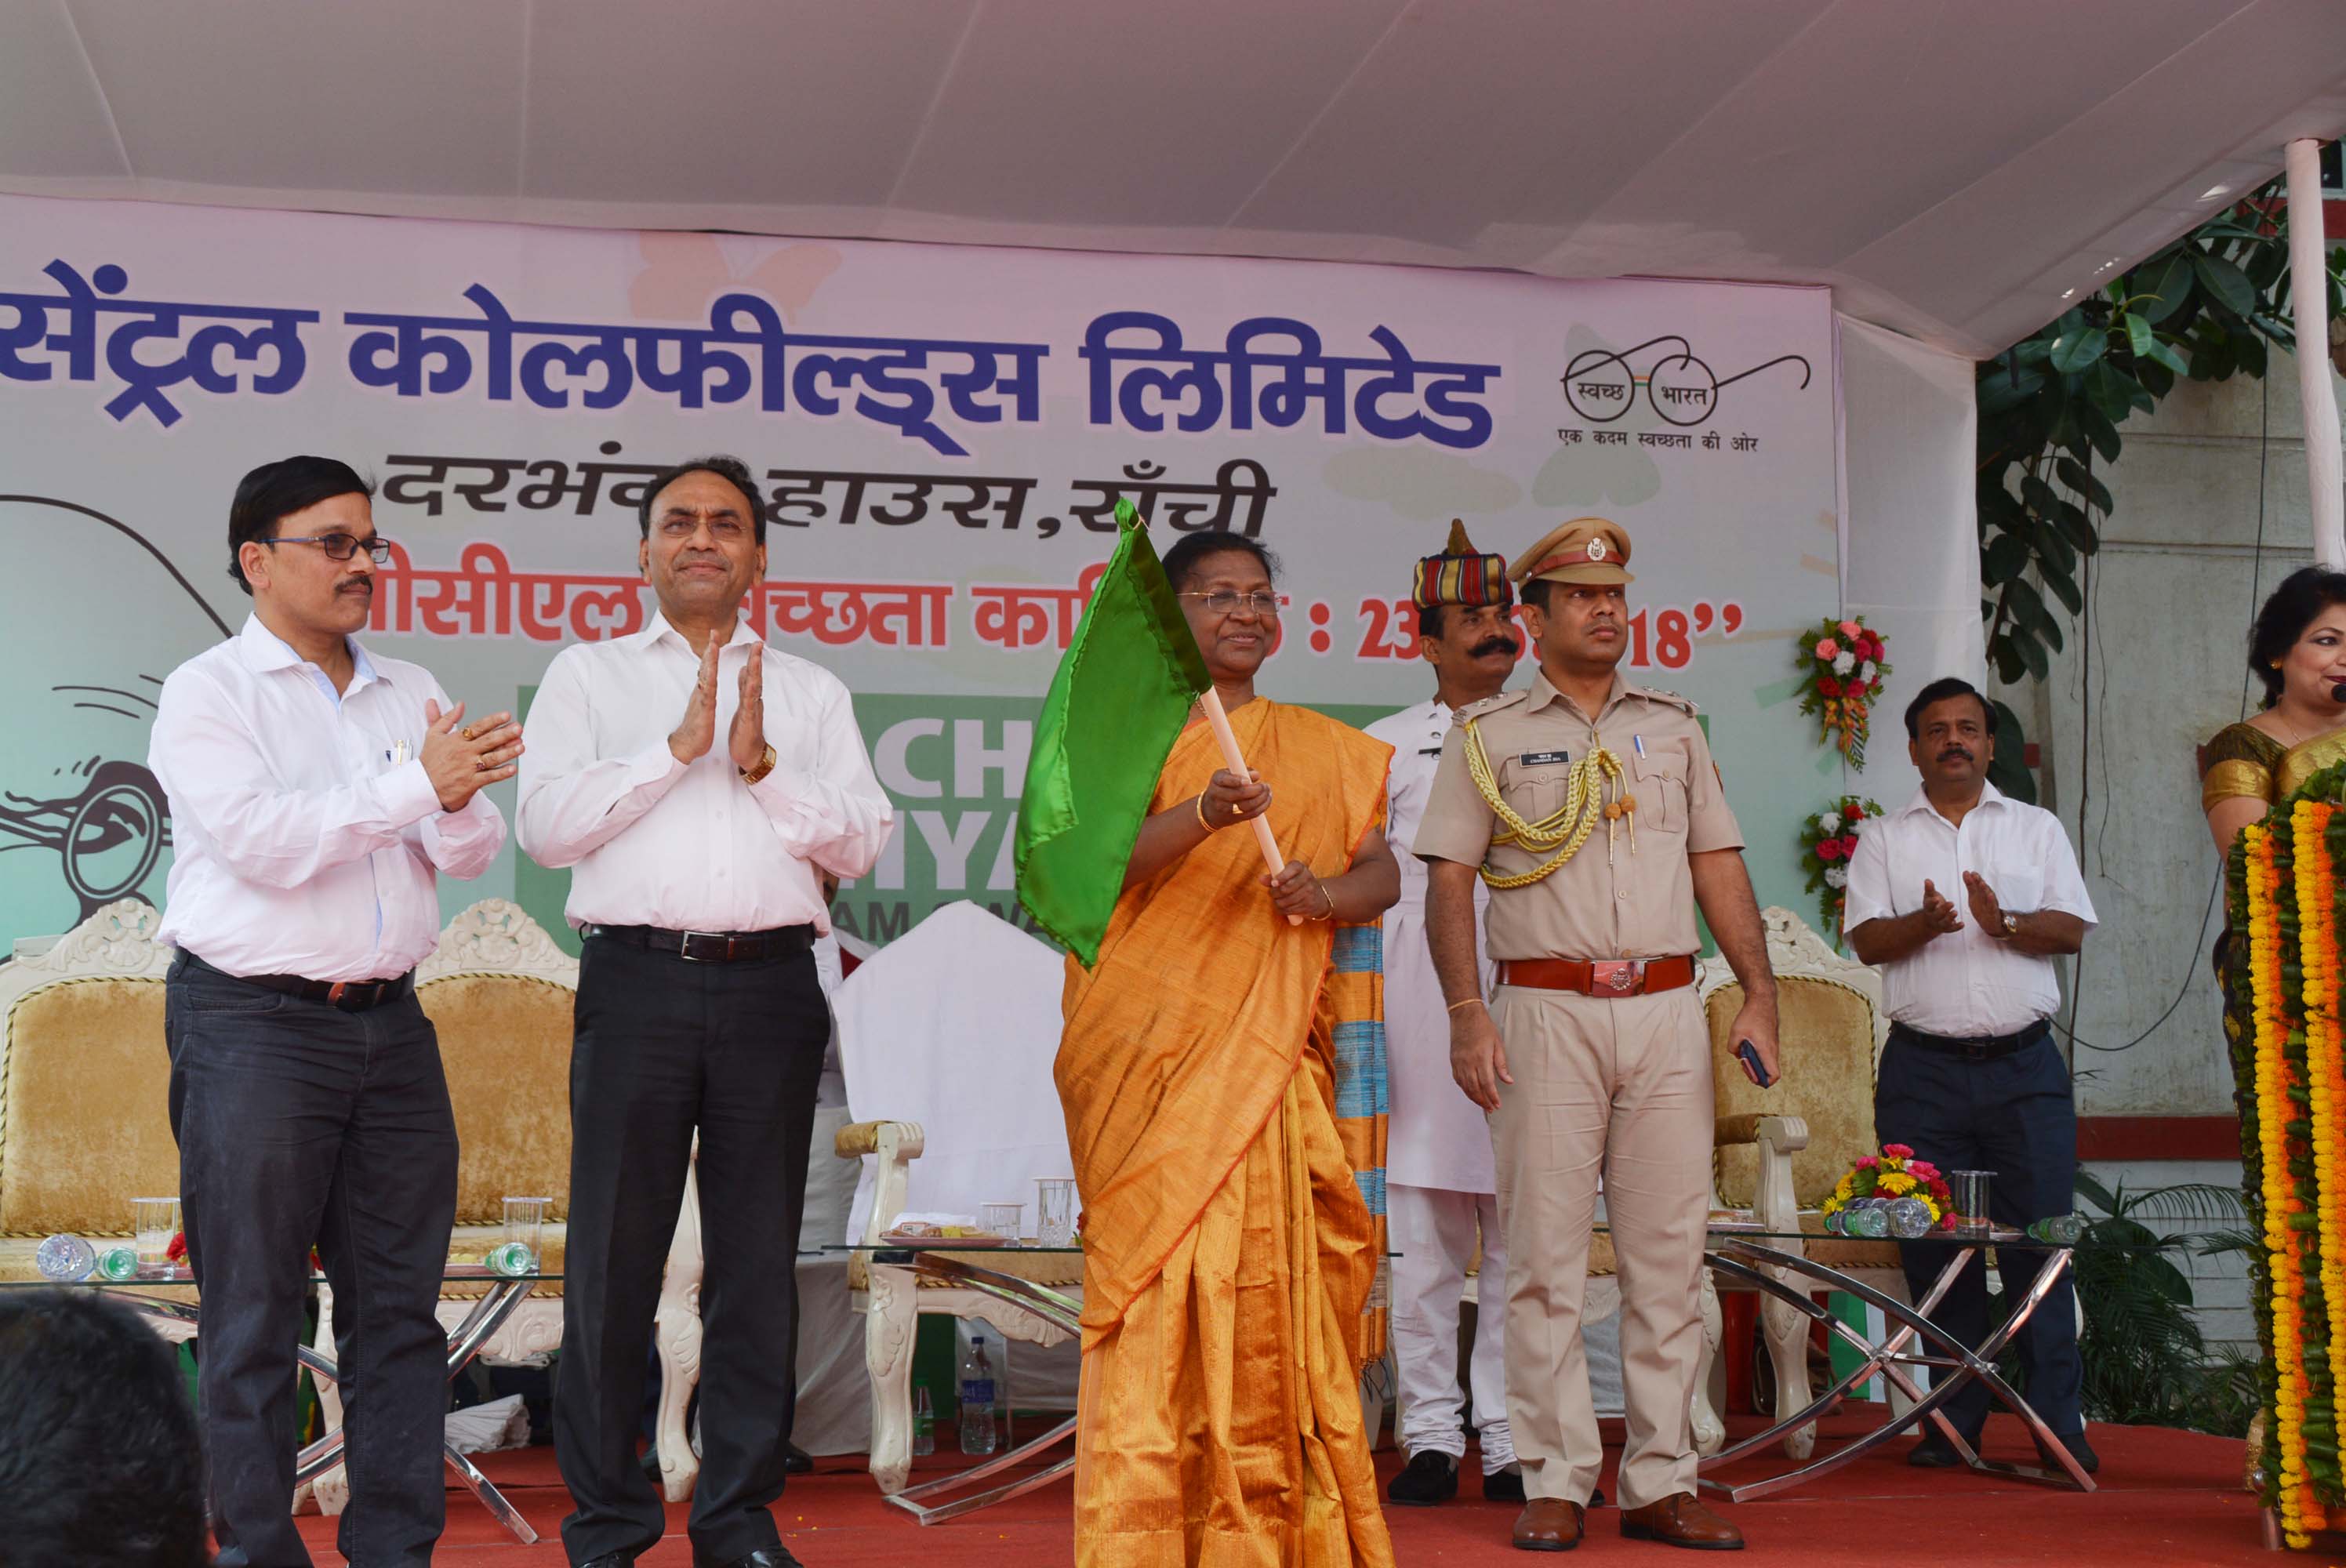 <p>Governor Droupadi Murmu along with CCL CMD Gopal Singh and others during Cleanliness Carnival at CCL Darbhanga House in Ranchi on Saturday.</p>
